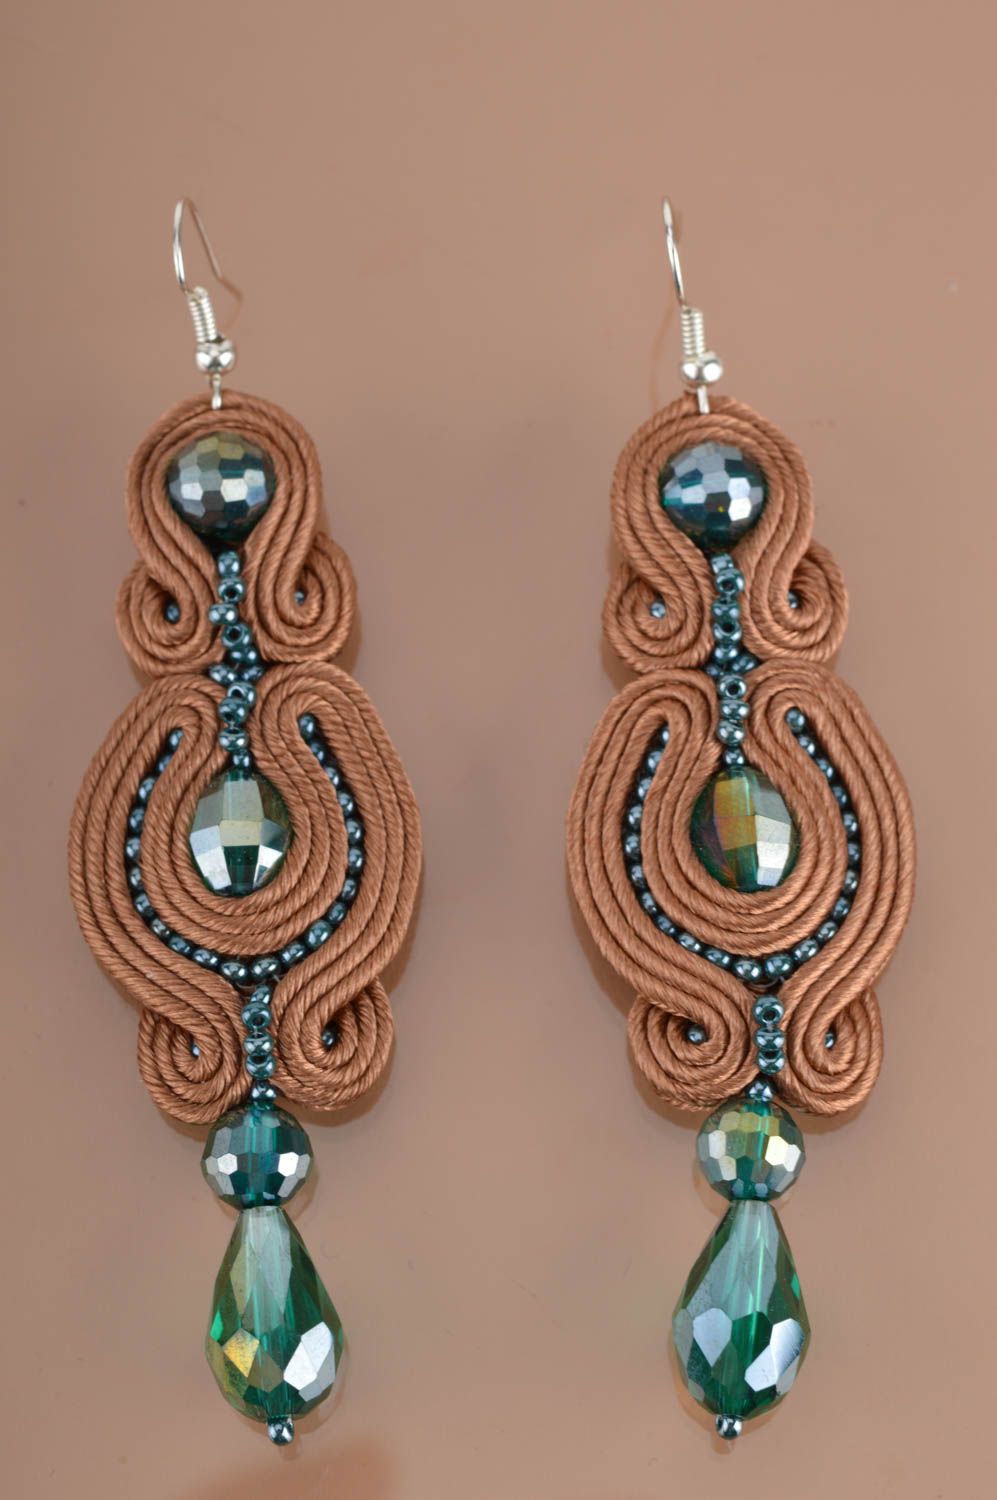 Brown massive long evening earrings created manualy using soutache technique photo 2